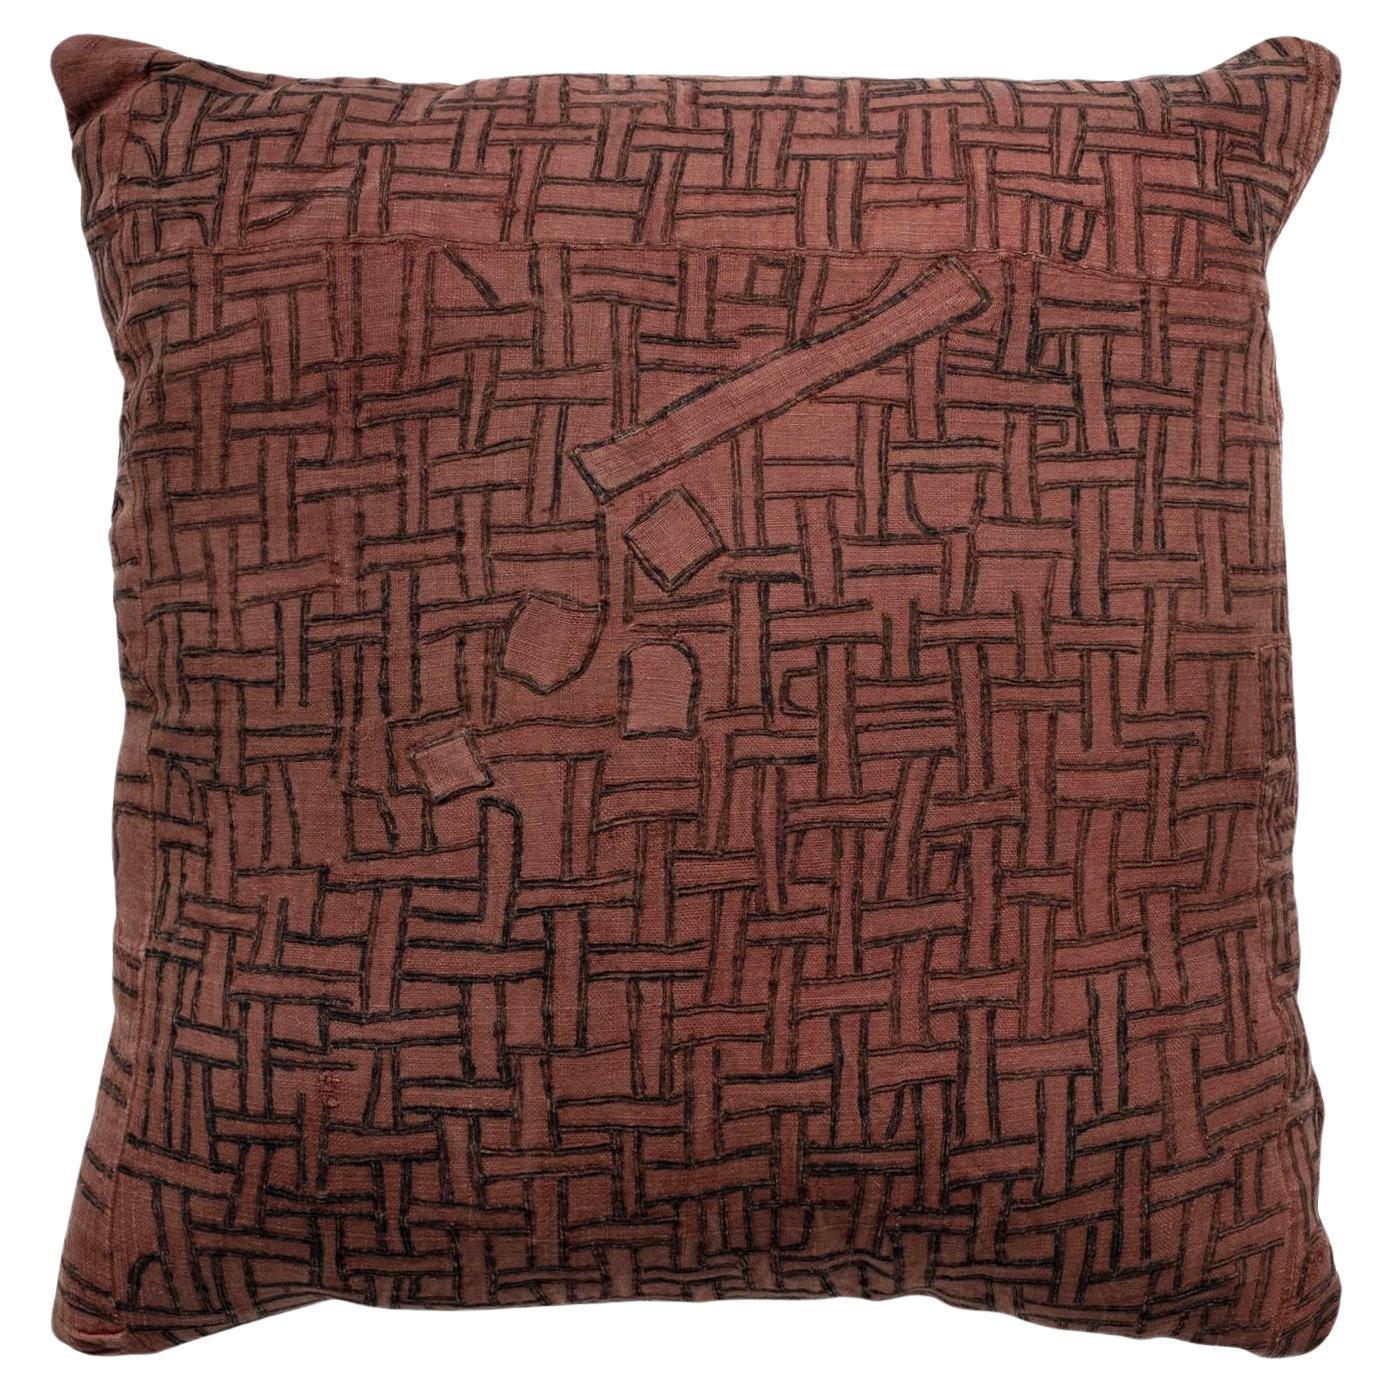 Wonderful Large Faded Plum-Color Embroidered Cushion